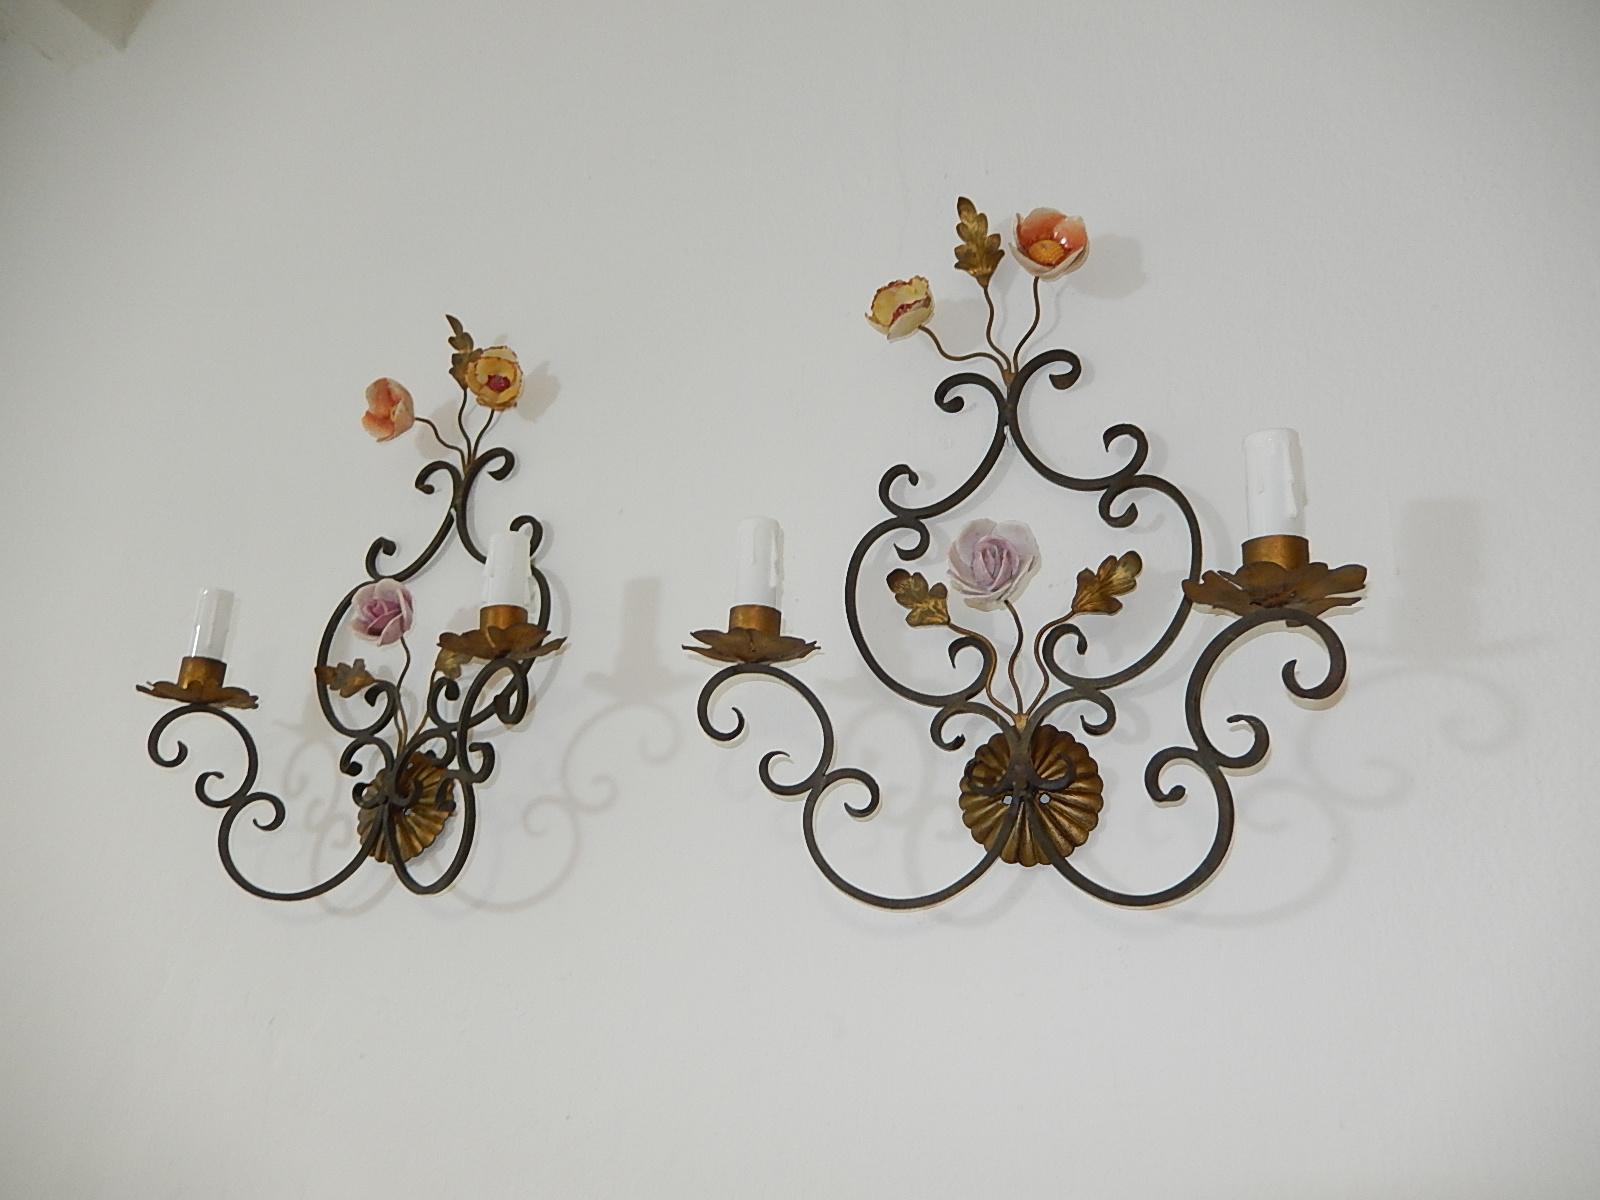 Housing 2 lights each. Will be rewired with appropriate sockets for country. UL US certified for the United States. Ready to hang. Leaves and bulb holders in detailed bronze. Handmade porcelain flowers. Free priority UPS shipping from Italy, no